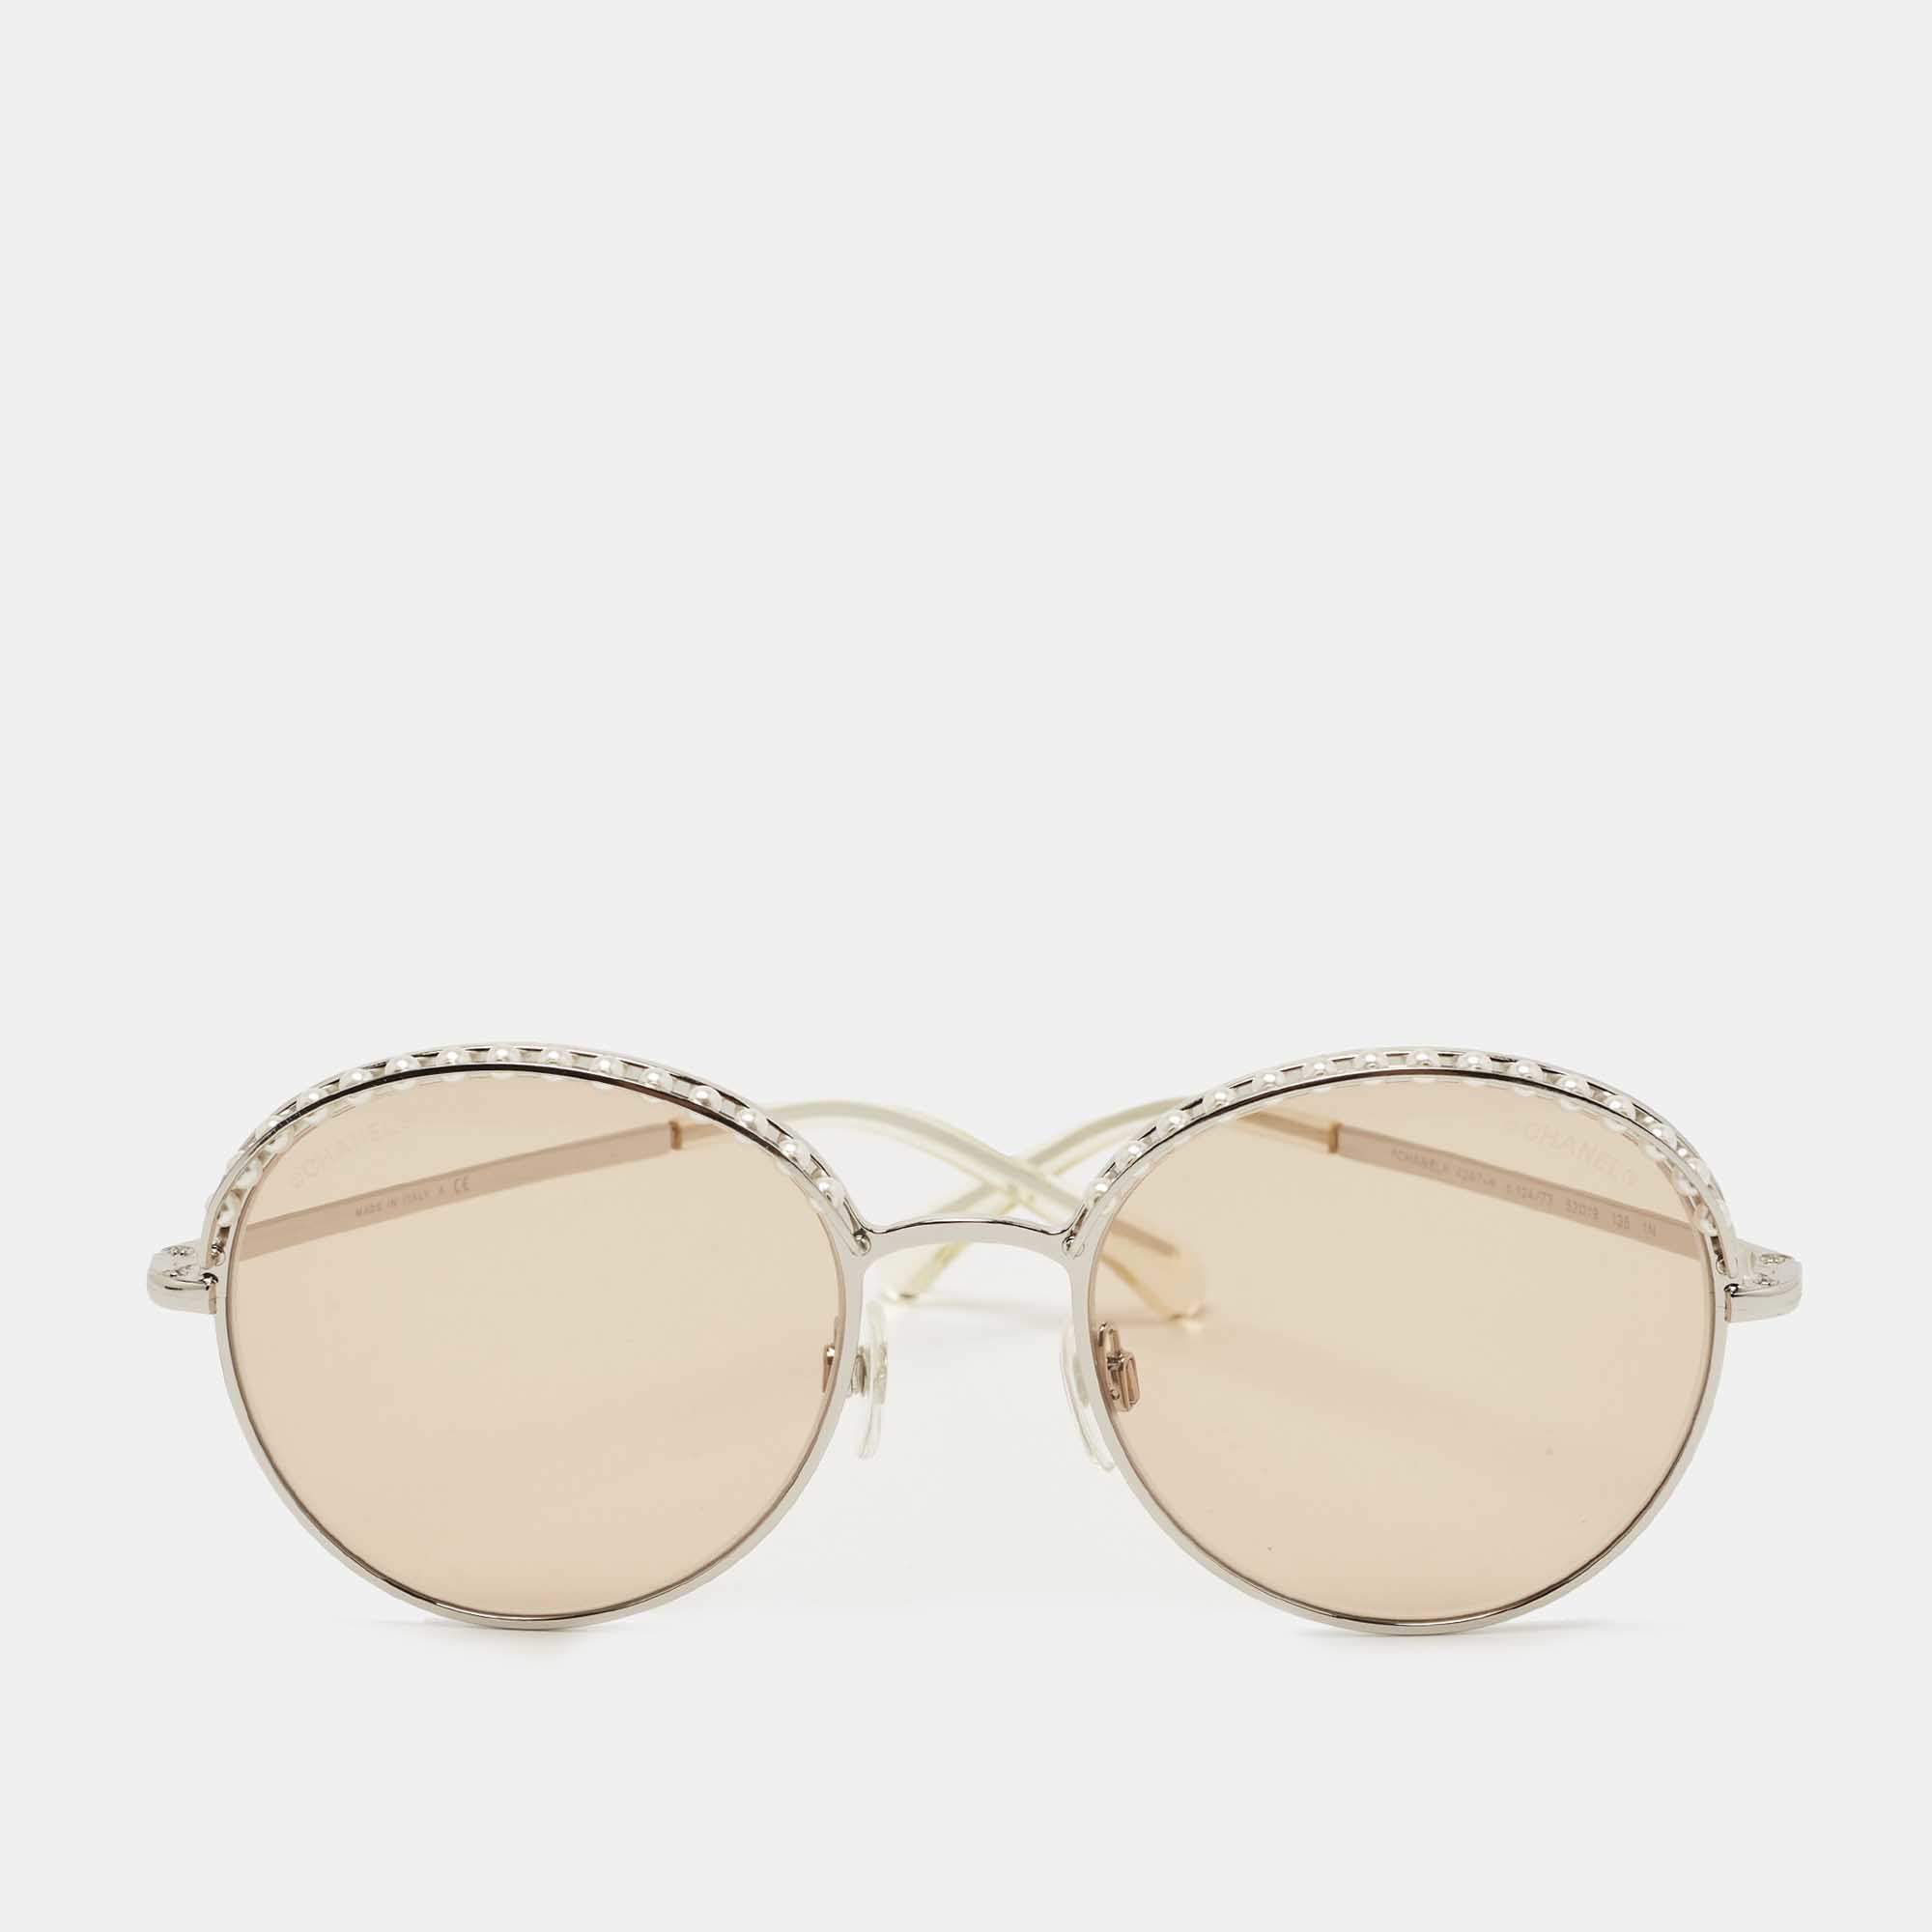 CHANEL Round Pearl Sunglasses 4247-H Pink 477634